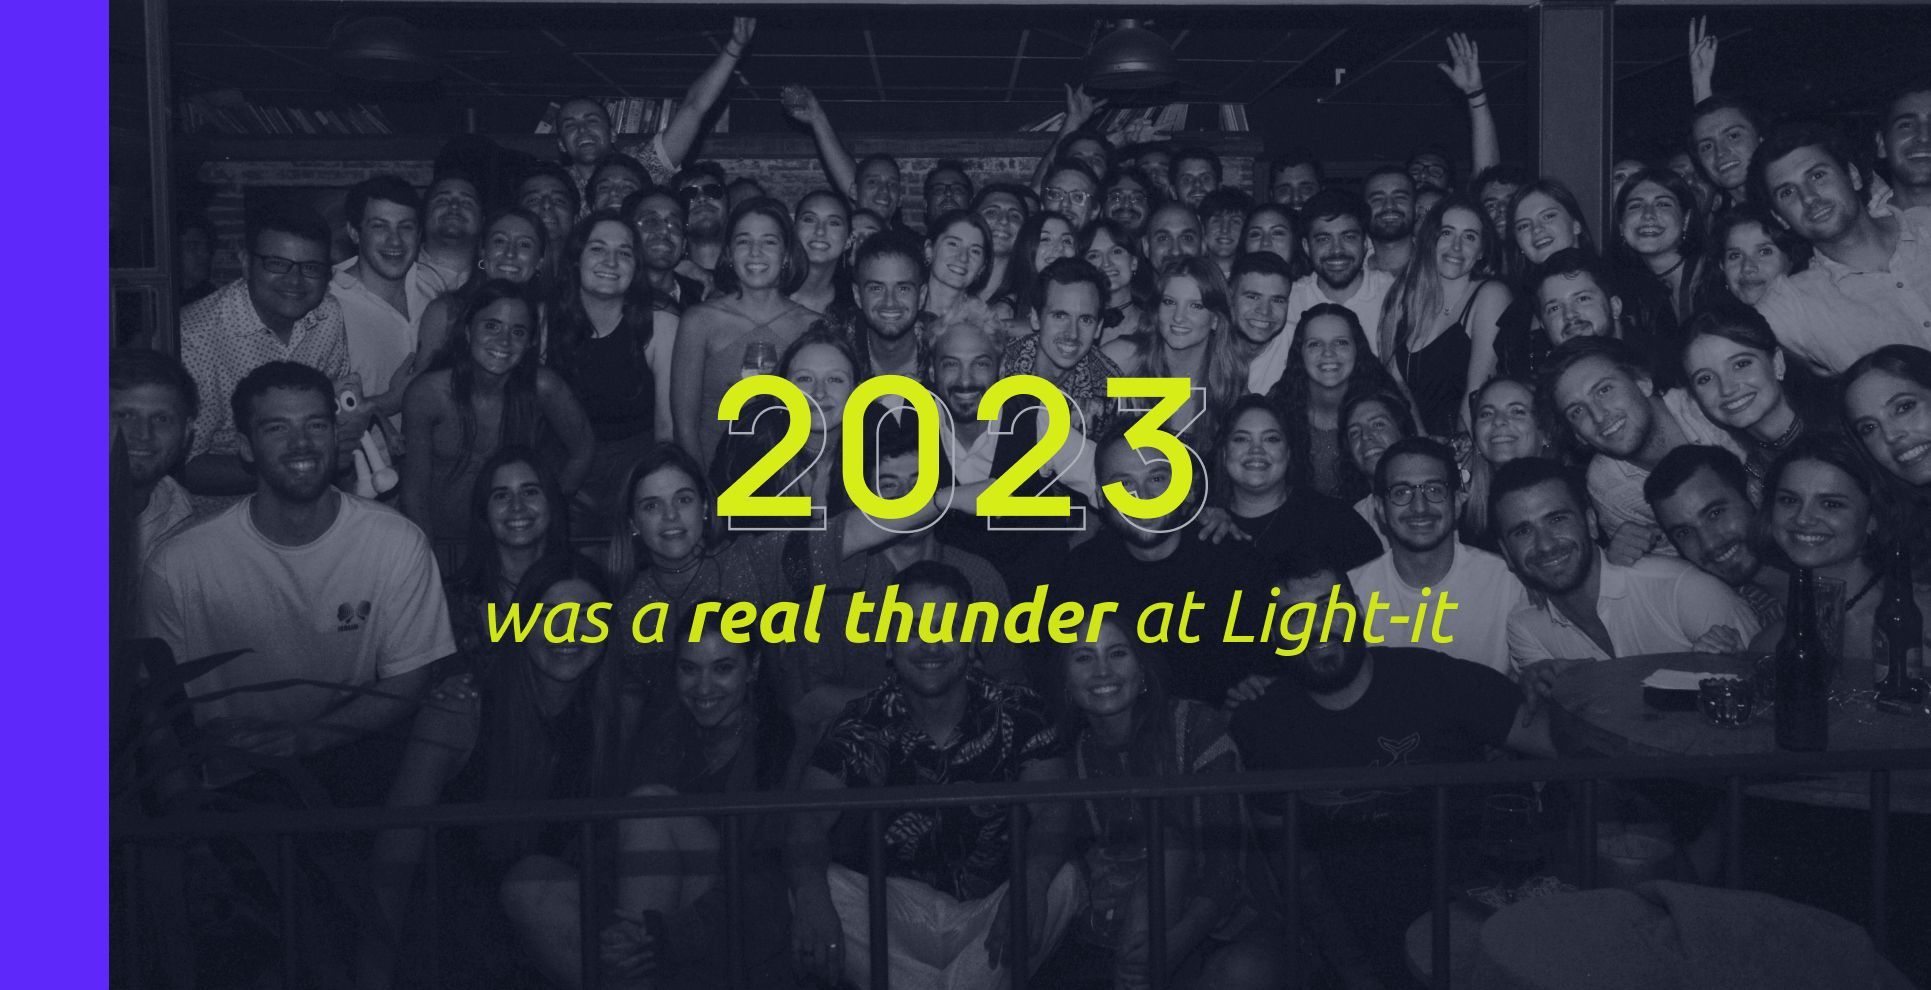 2023 was a real thunder at Light-it